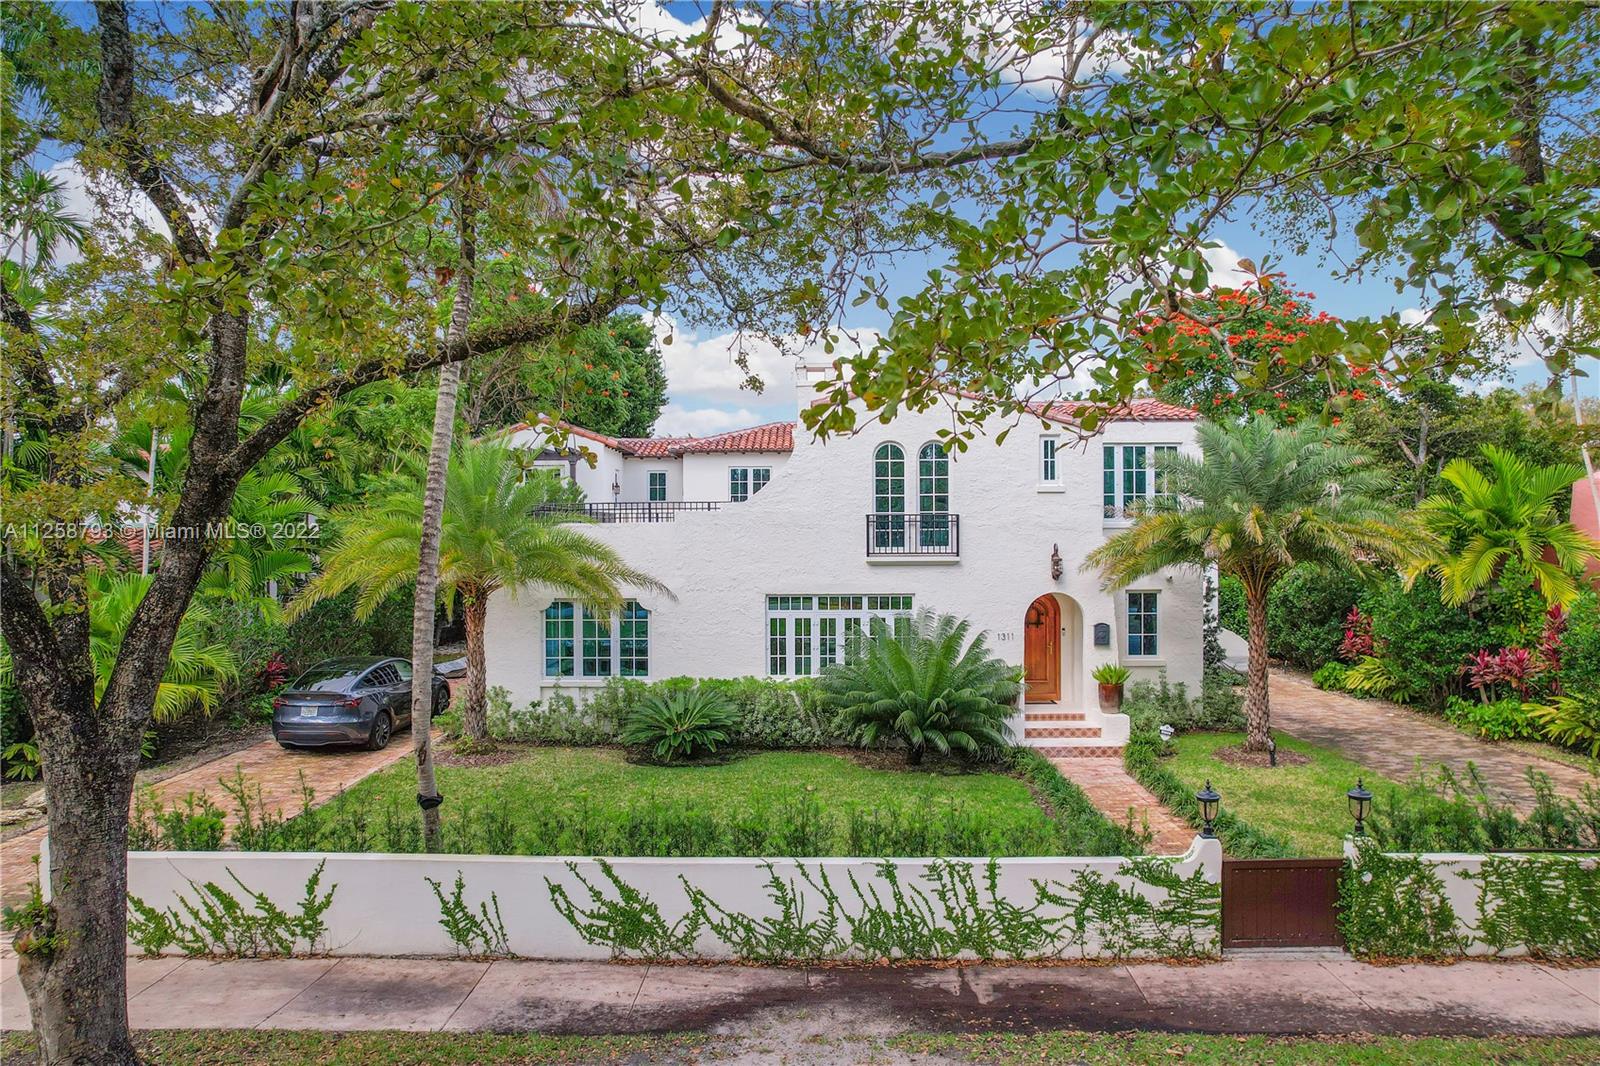 Welcome to this beautiful classical Coral Gables 5 bed property that sits on Alhambra Circle on a 15,000 square-foot lot a block away from the Granada golf course. The original home was gutted to the ground in 2020. This house remodel included an extension, a second story and a separate independent in law quarter or office. Wood floors, movie theater and a top-notch kitchen. The appliances are subzero fridge/freezer, Wolf gas range and Mile dishwasher. Sound system, security system and an elevator. Large covered BBQ and dining area, outdoor bar and lush landscaping.